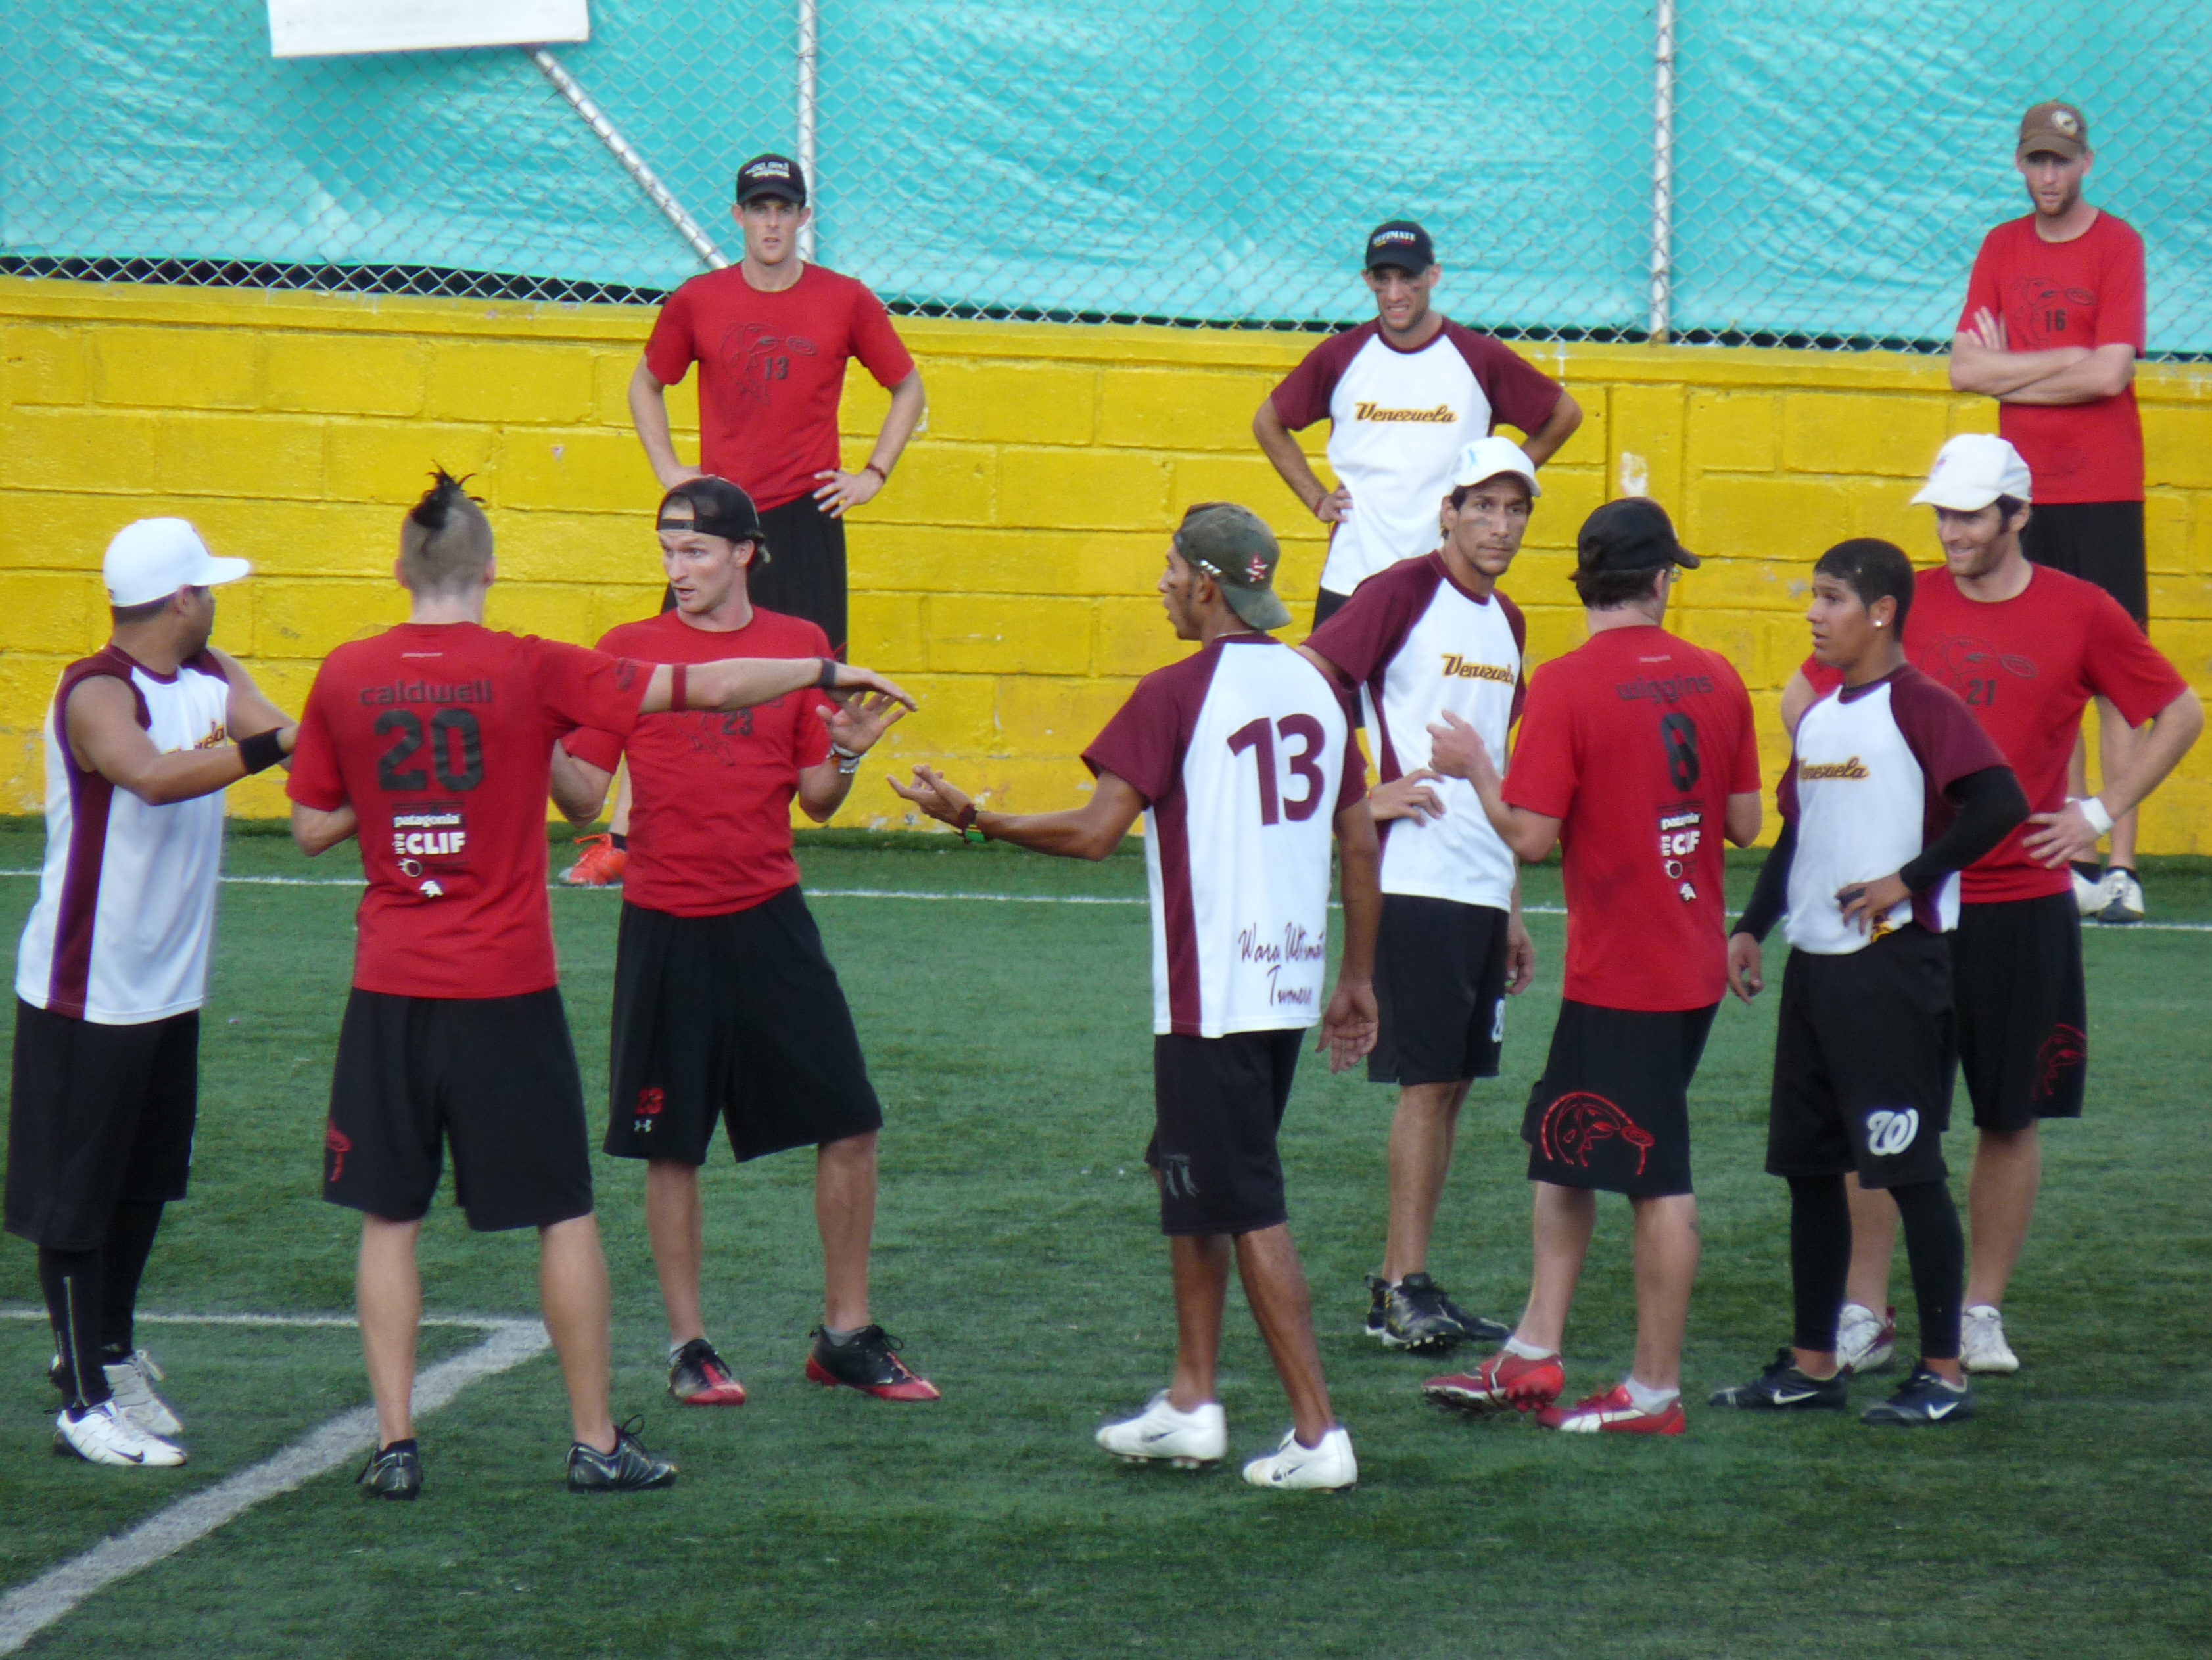 Venezuelan players discuss a call with Sockeye at Torneo Eterna Primavera 2009 in Medellín, Colombia